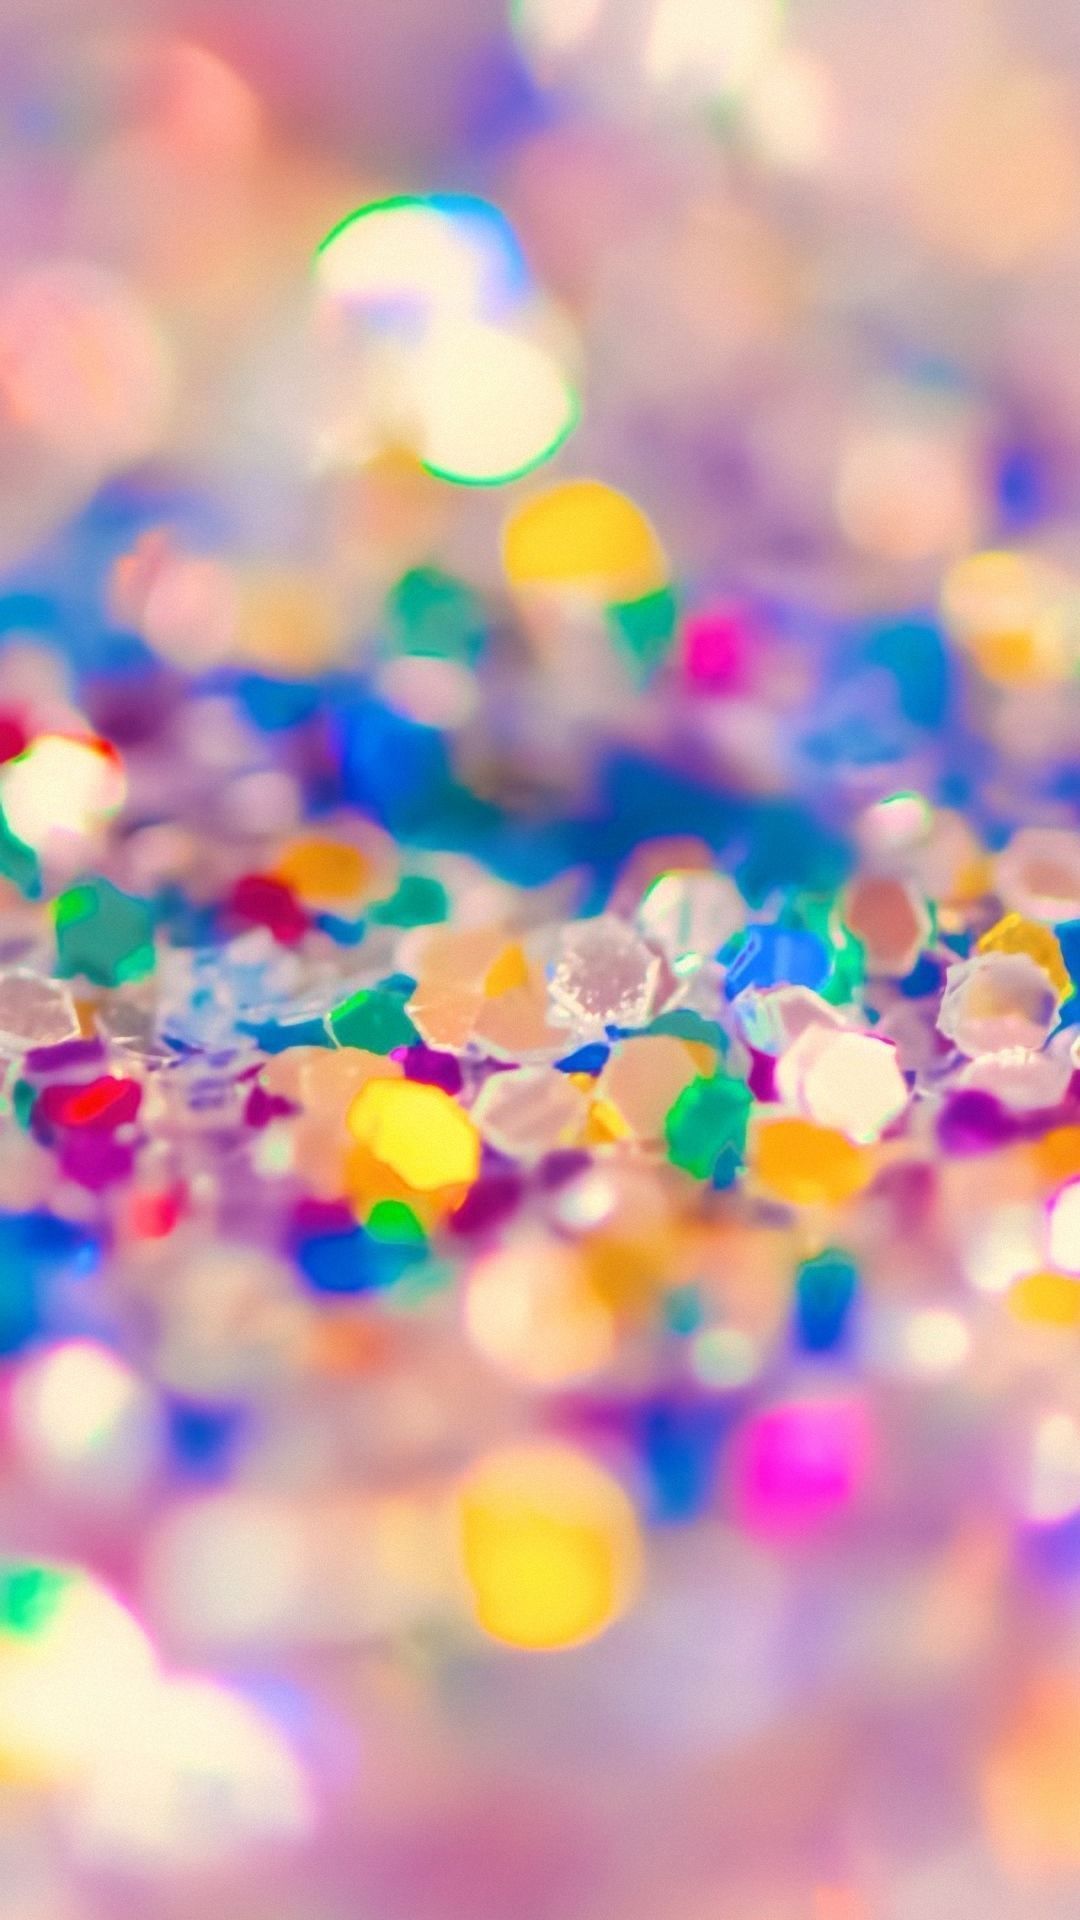 Glitter Hd Wallpapers Group 66